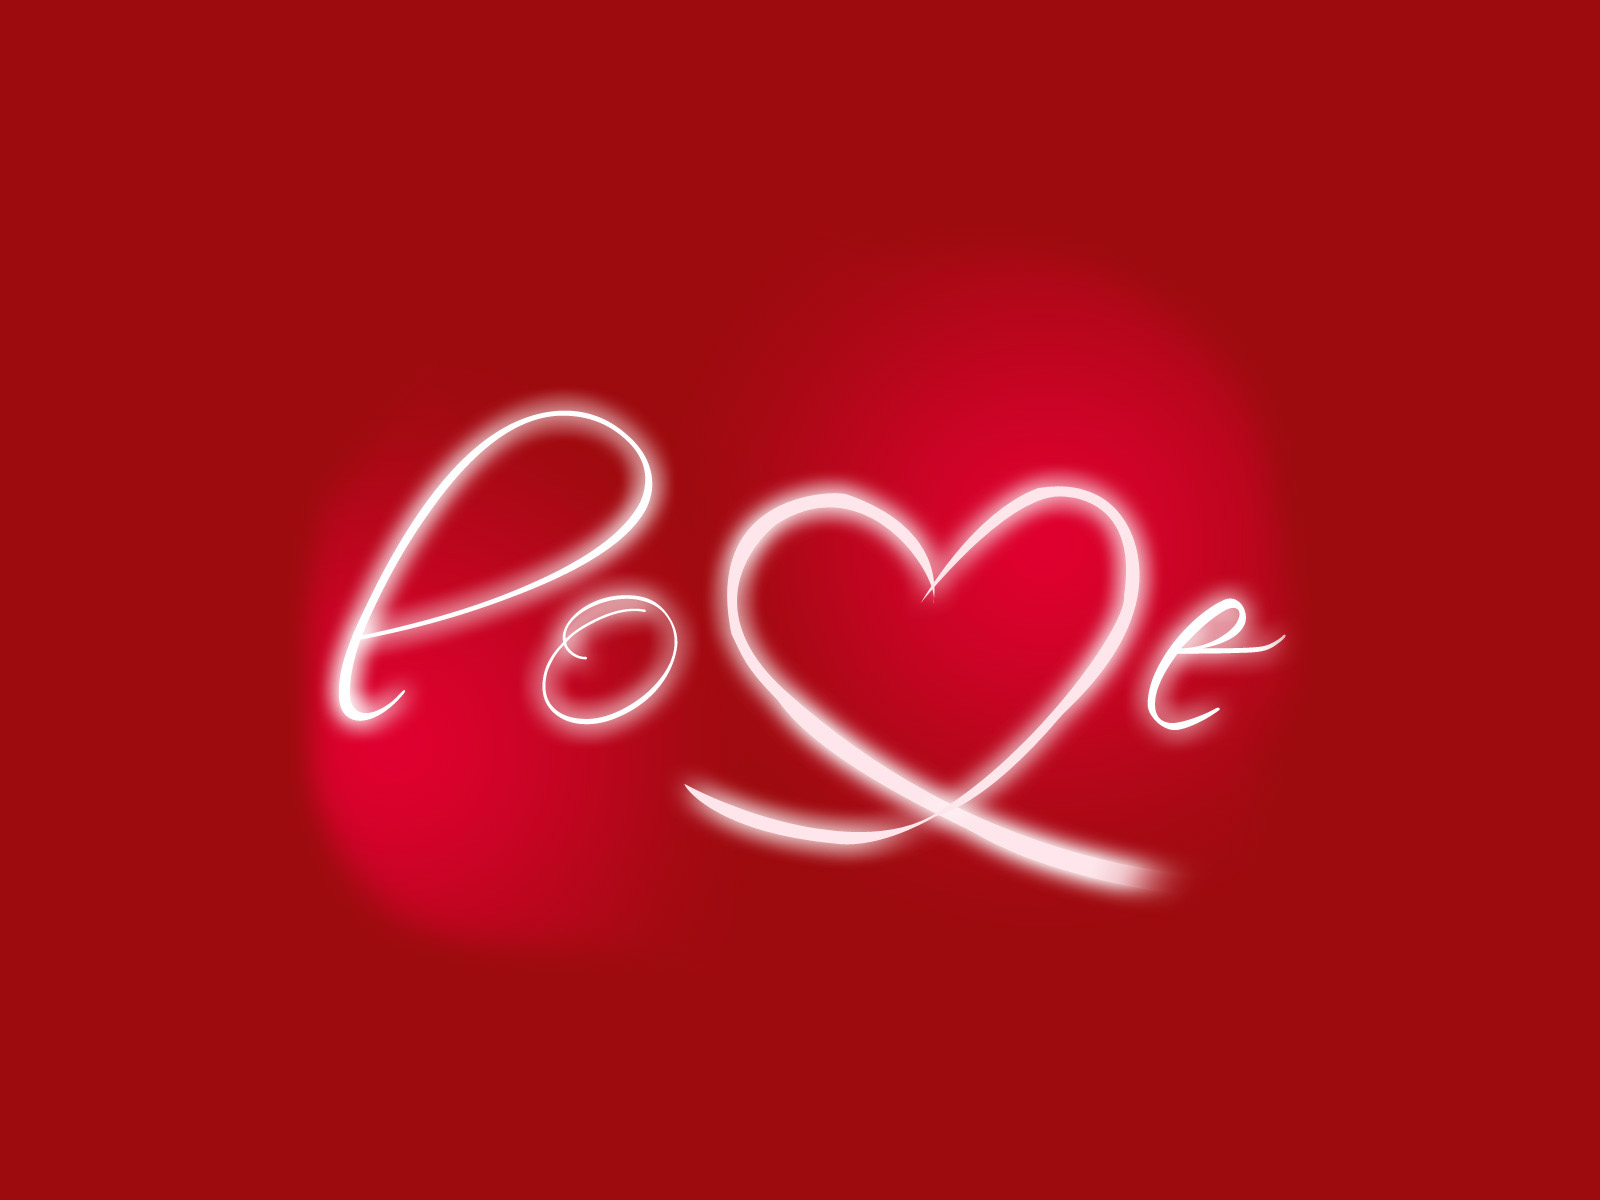 Love Messages HD Wallpaper In Imageci